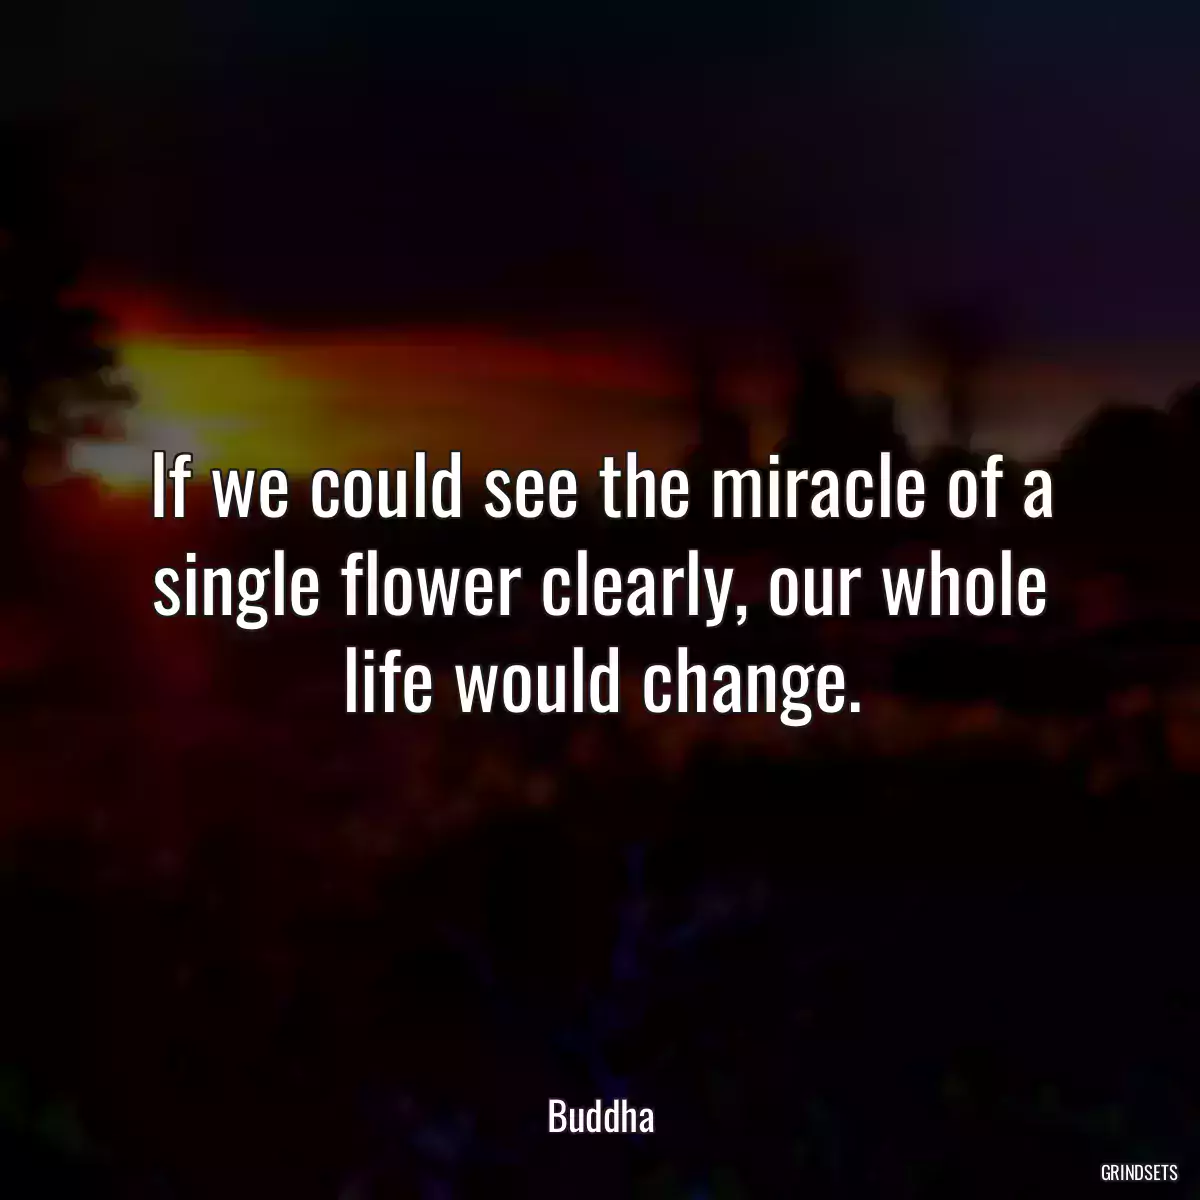 If we could see the miracle of a single flower clearly, our whole life would change.